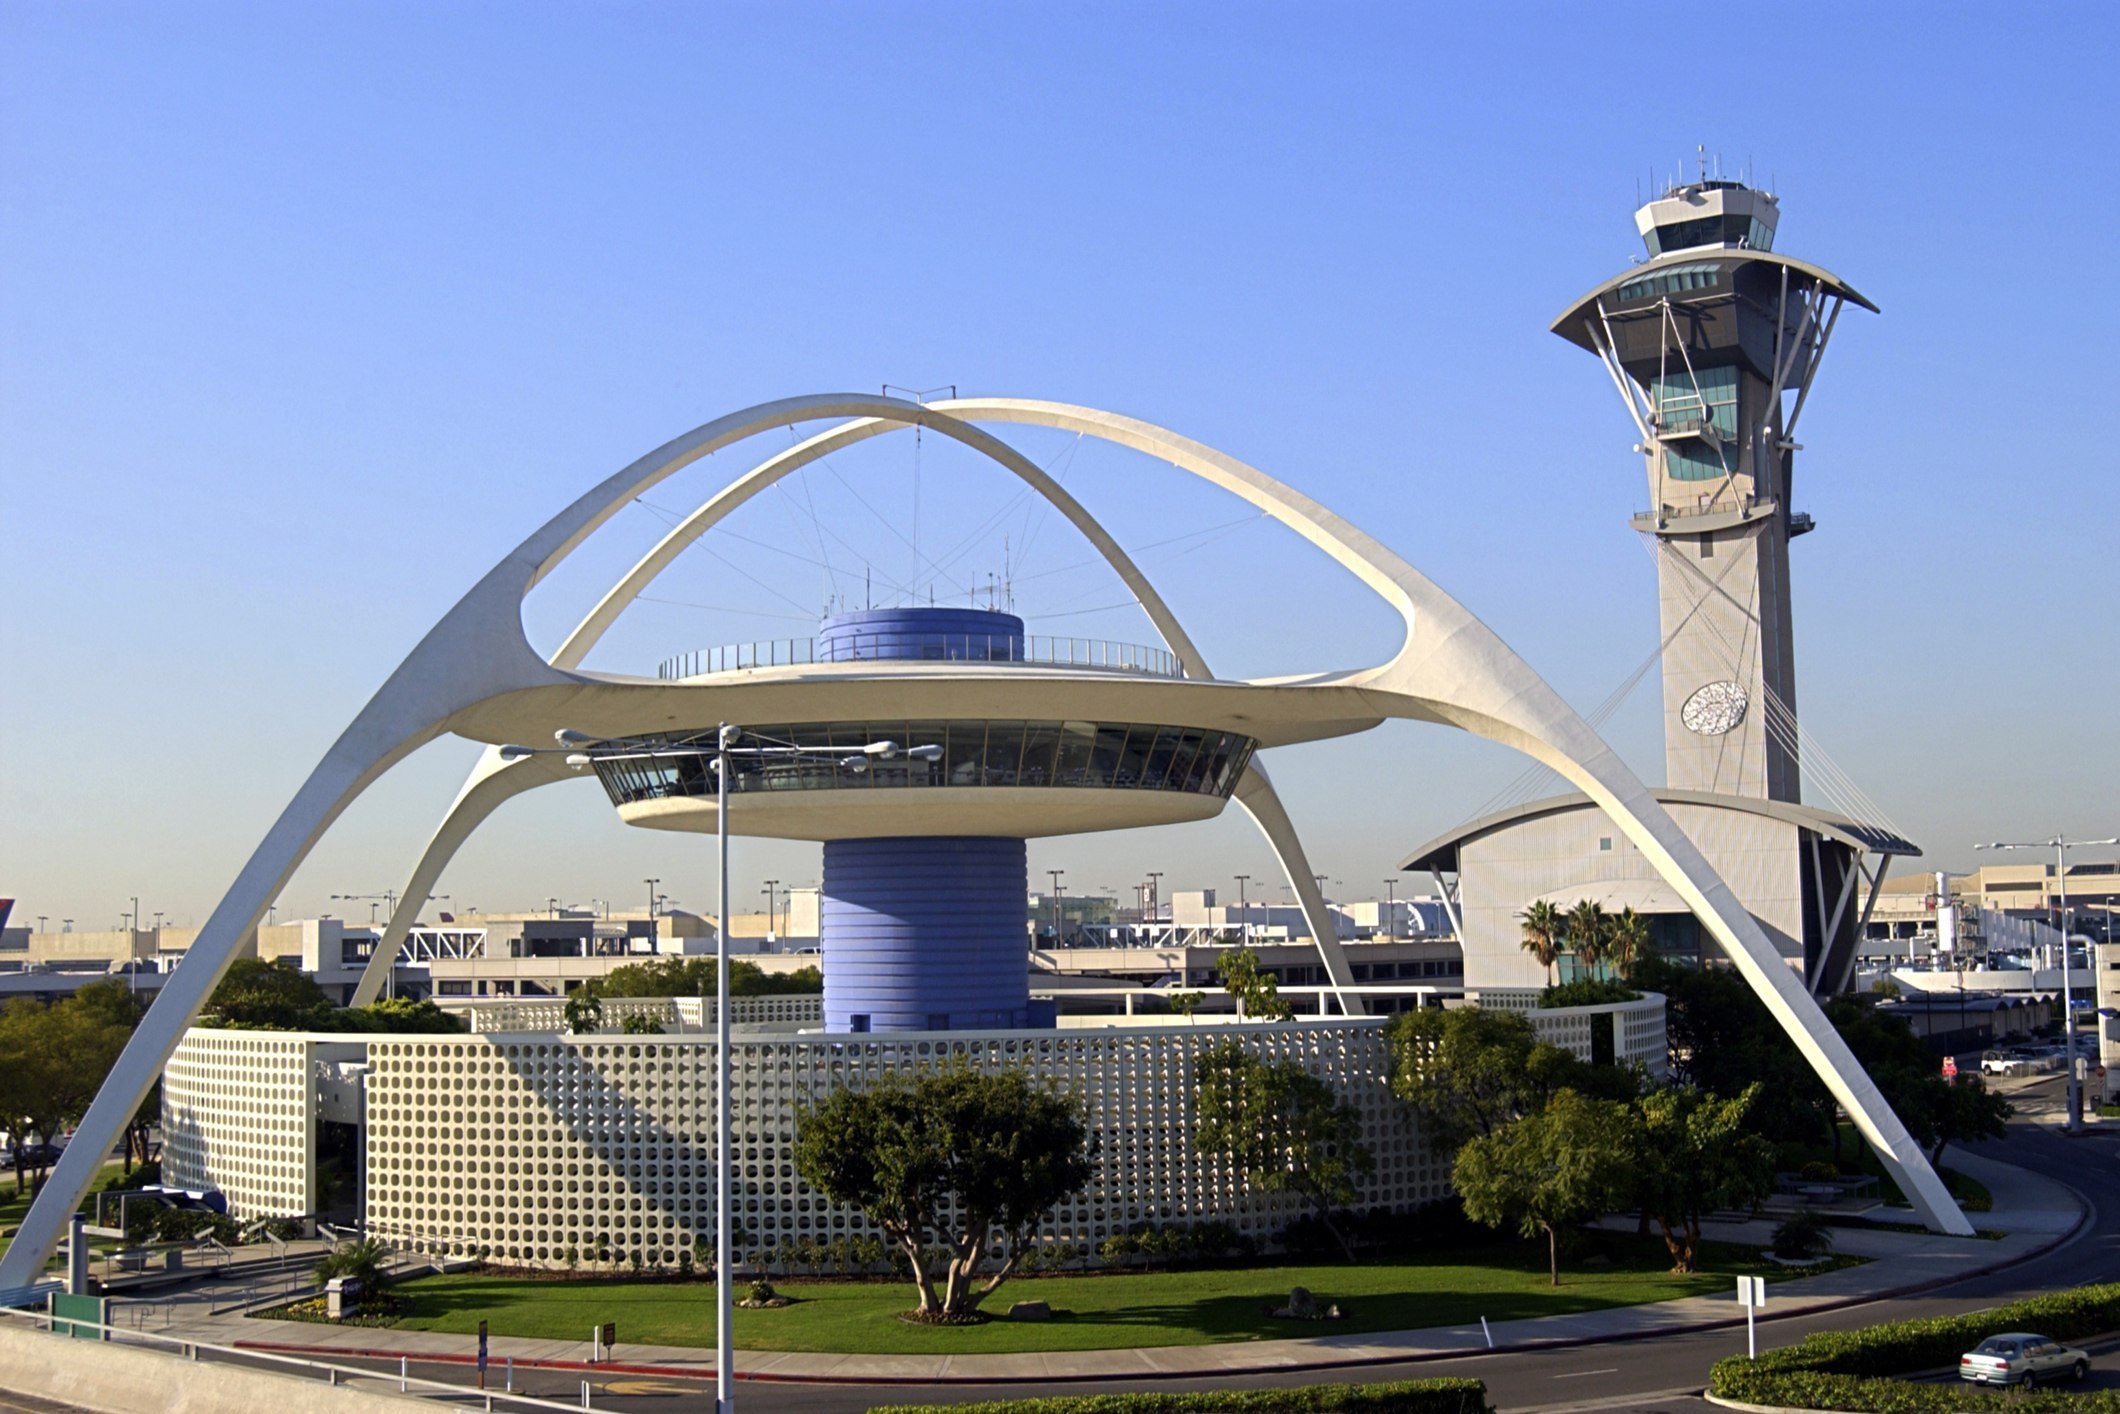 LAX airport in Los Angeles